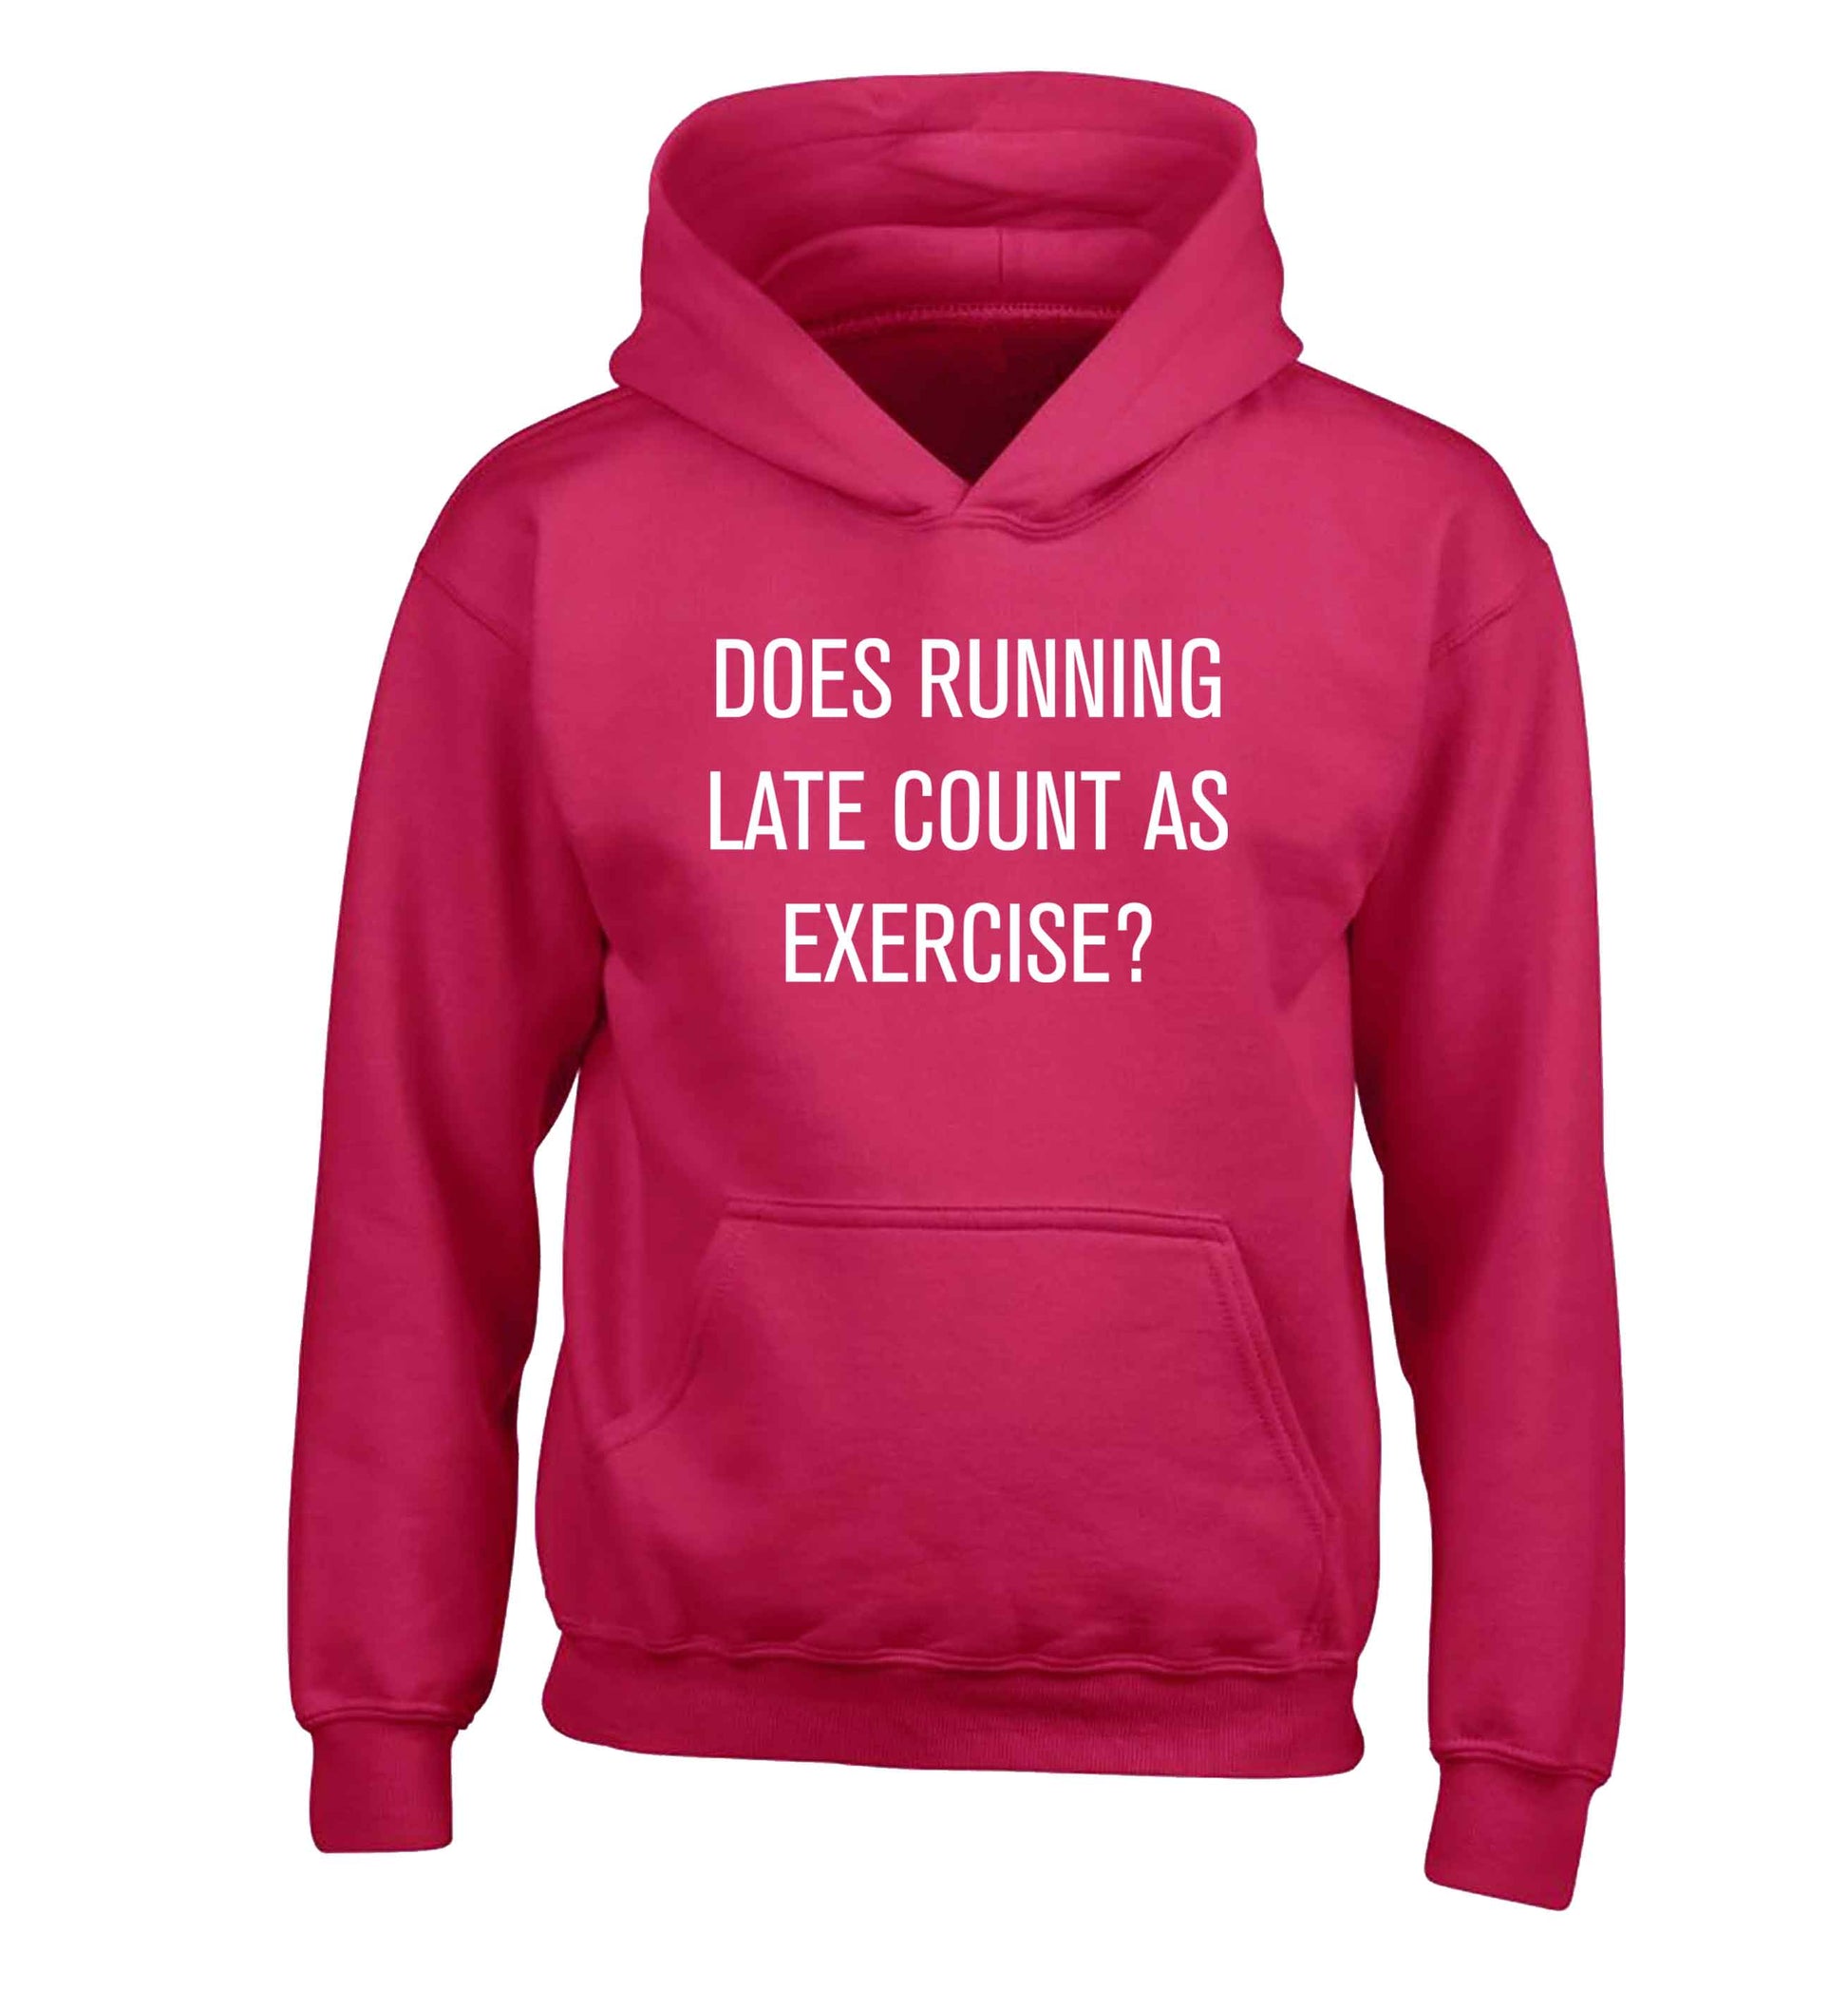 Does running late count as exercise? children's pink hoodie 12-13 Years